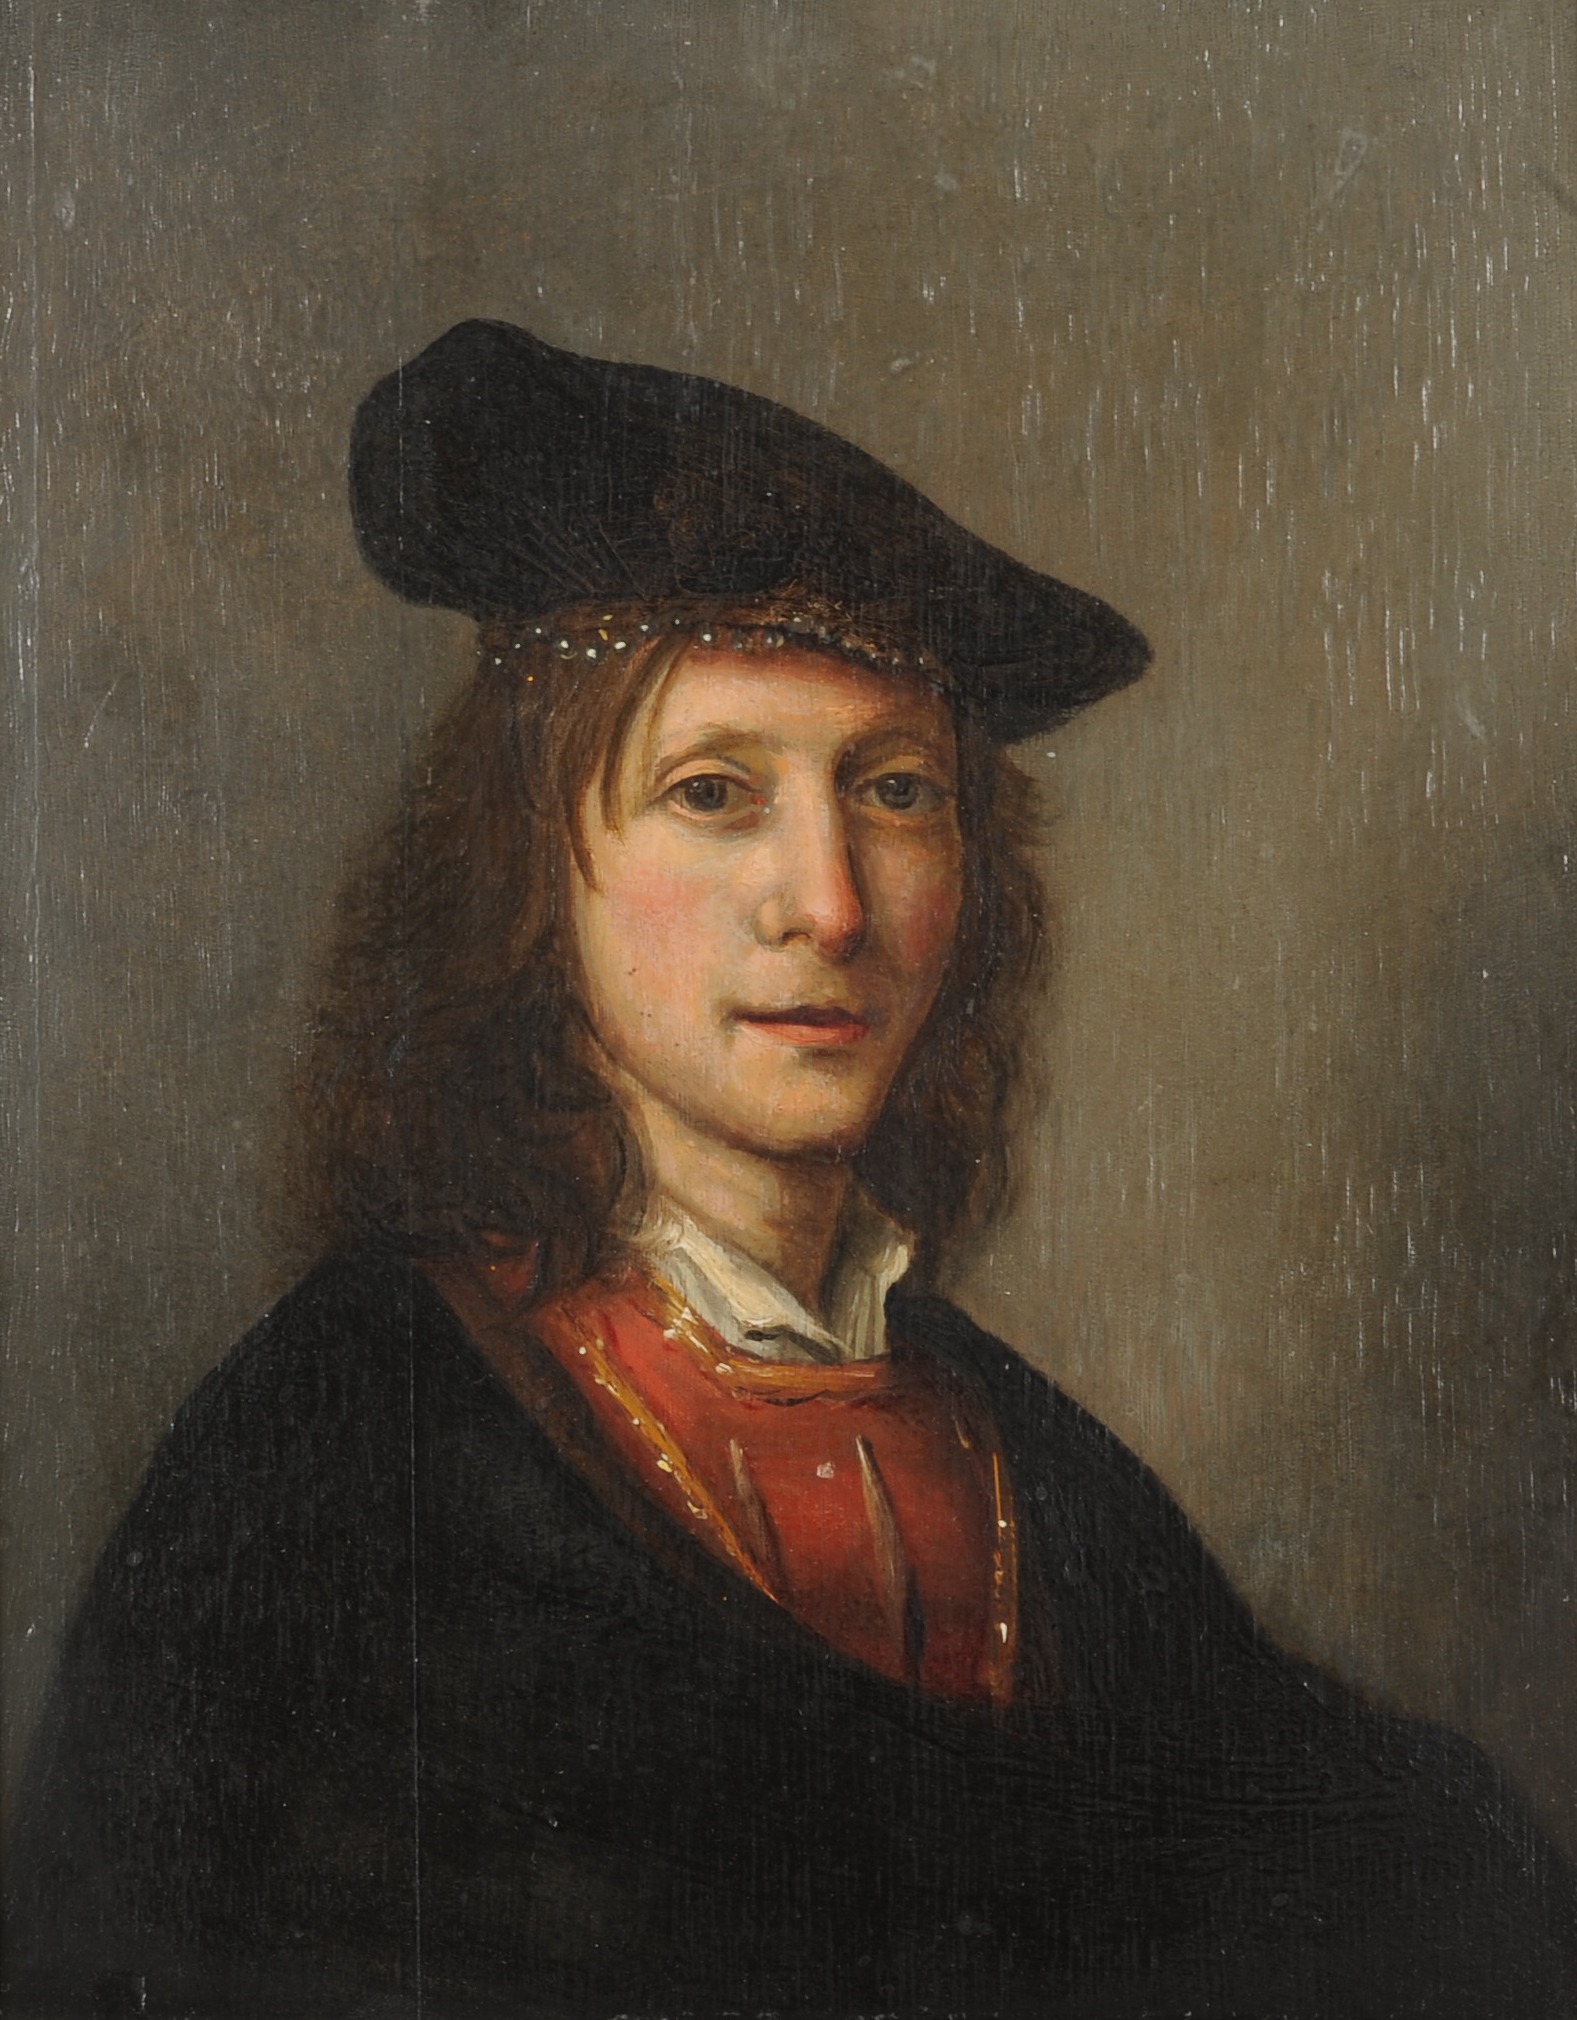 DUTCH SCHOOL (17th/18th Century), Head and shoulders portrait of a young man, wearing a velvet beret